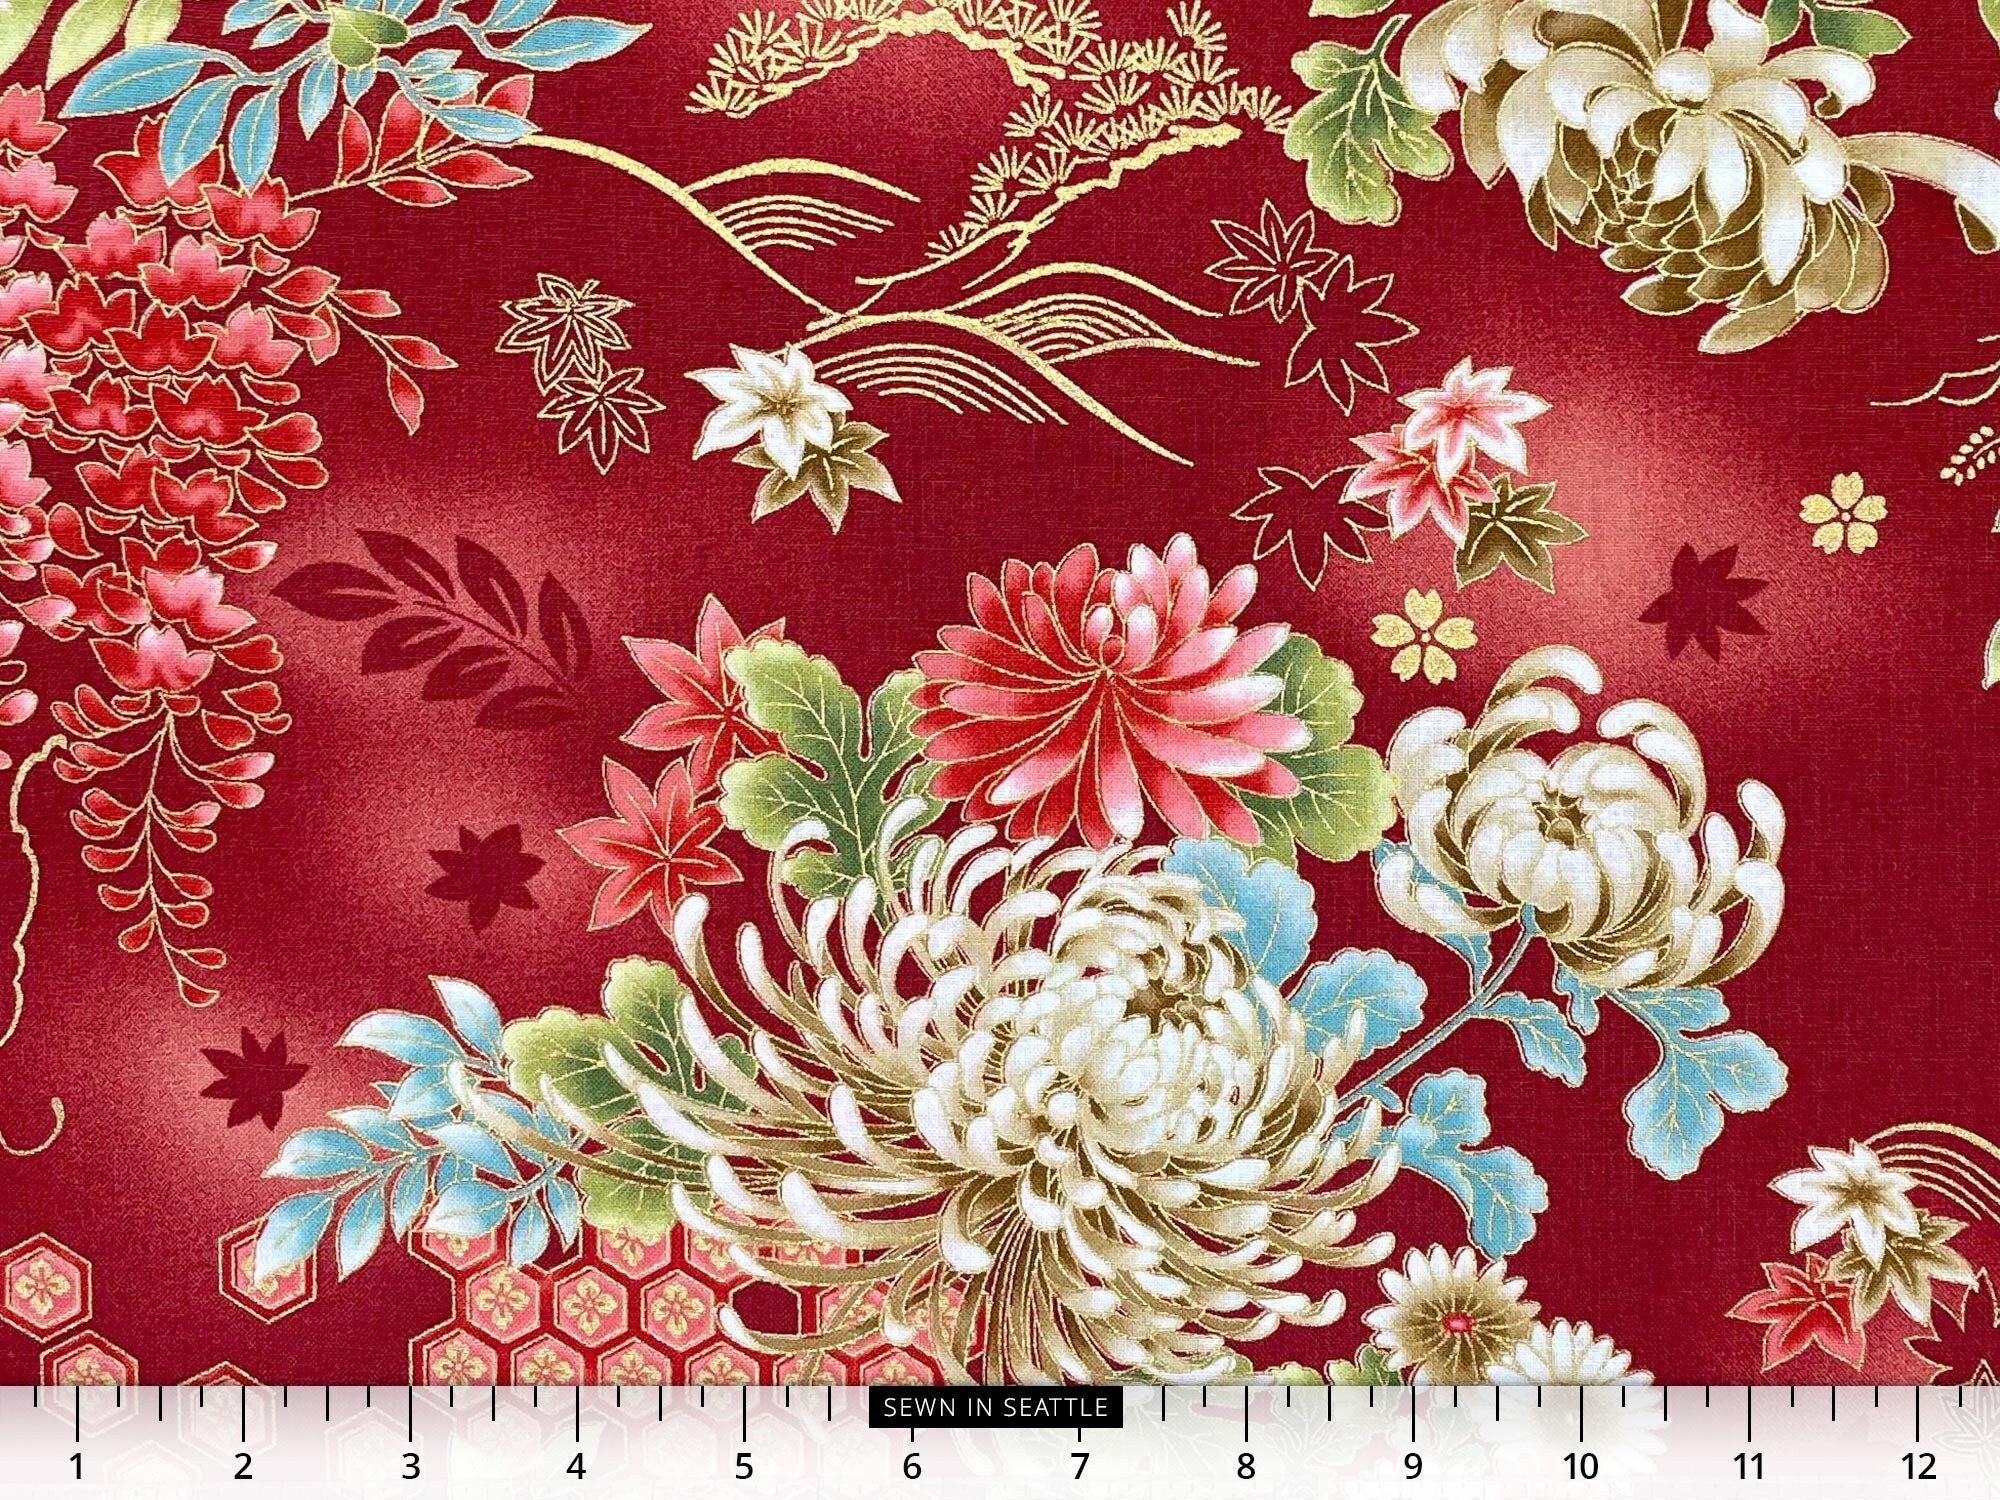 Japanese Floral Pattern Kimono Style Wrapping Paper by Heroinax